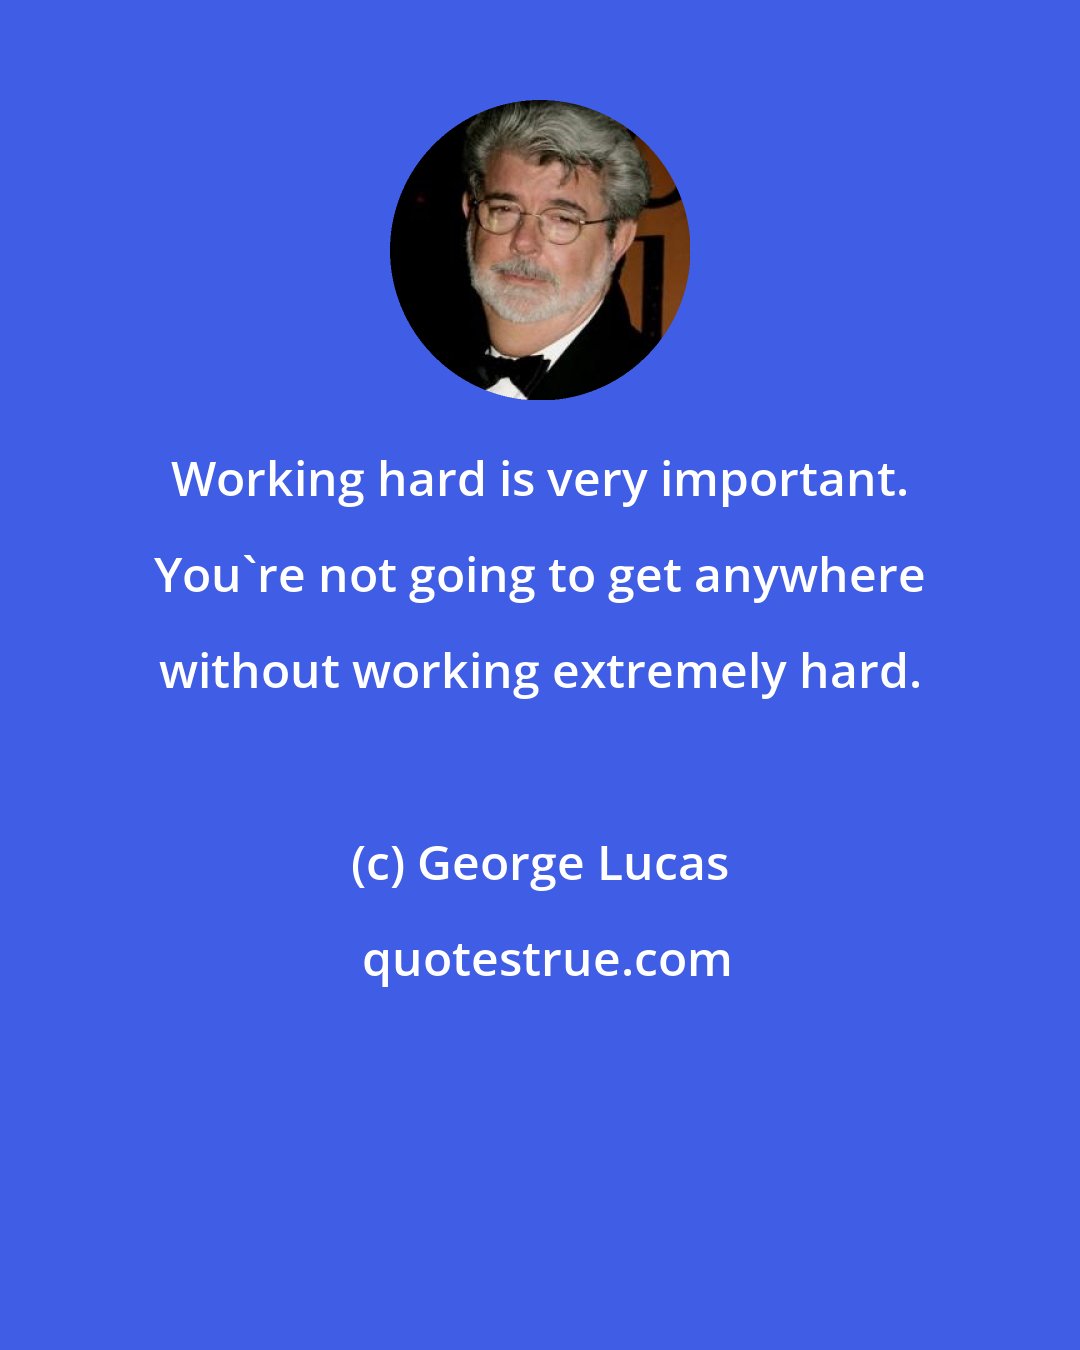 George Lucas: Working hard is very important. You're not going to get anywhere without working extremely hard.